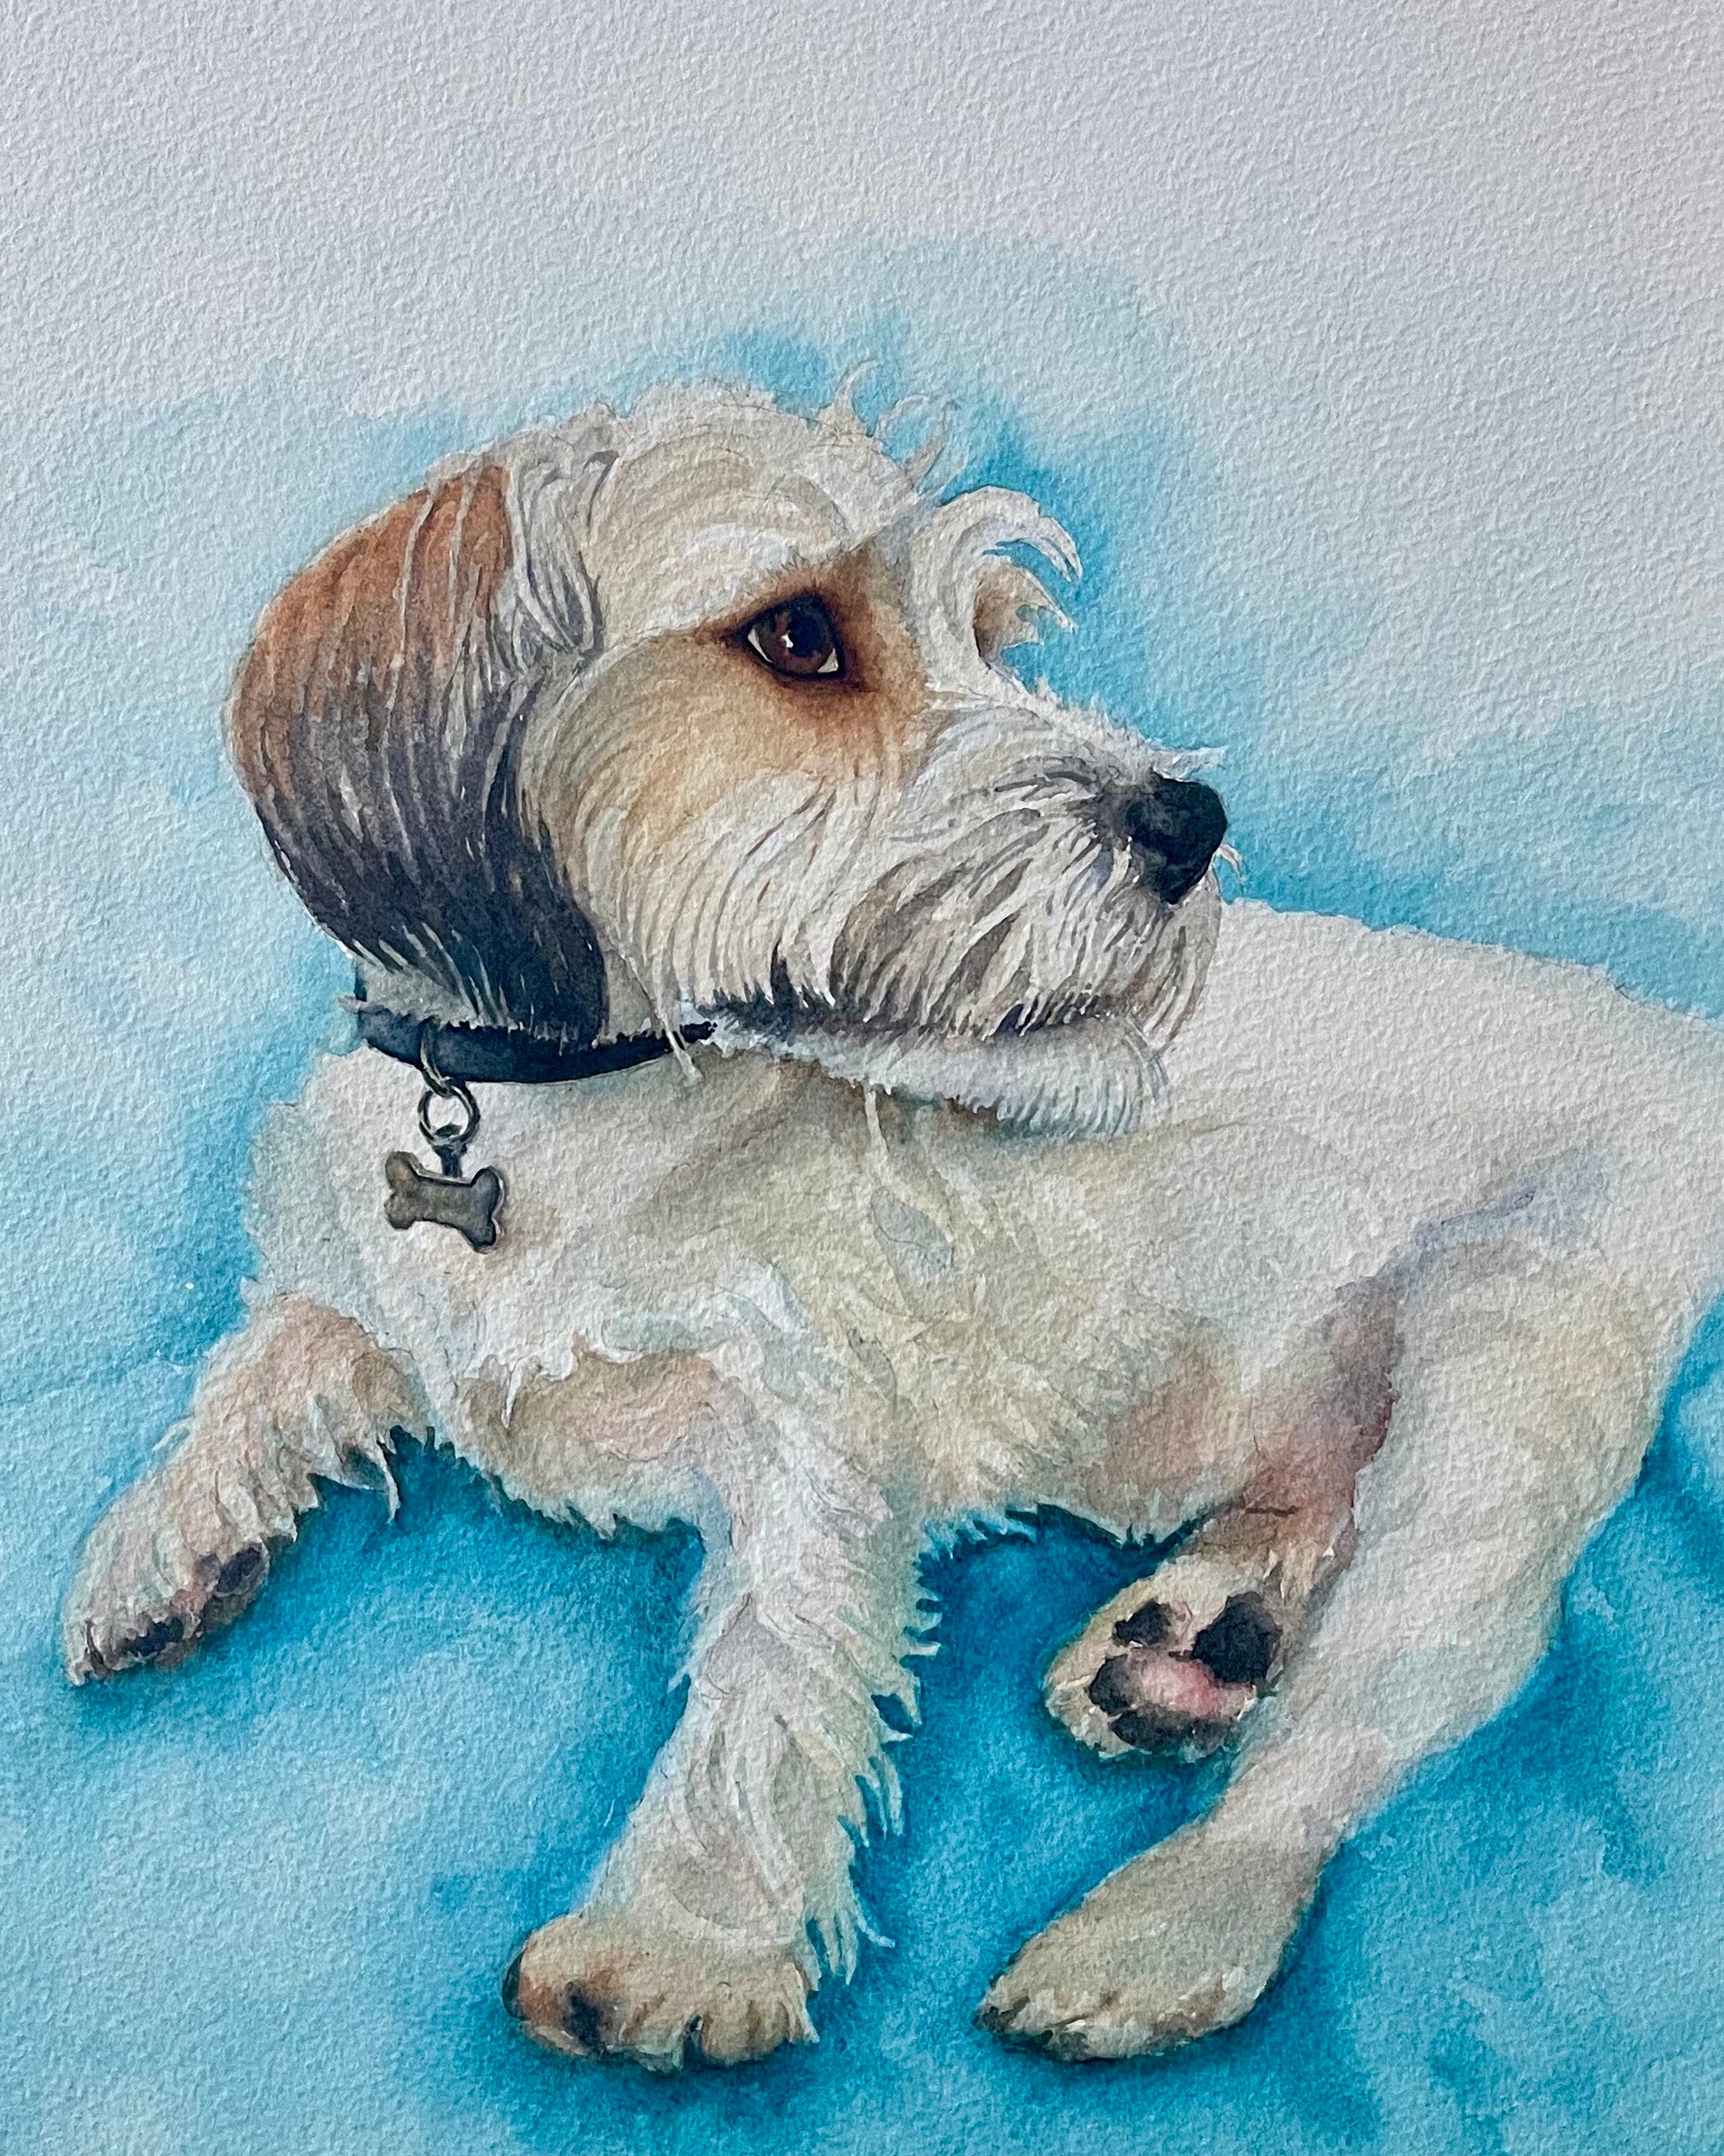 jack Russell terrier dog watercolour side portrait on blue cloth lying down with head up turning backwards